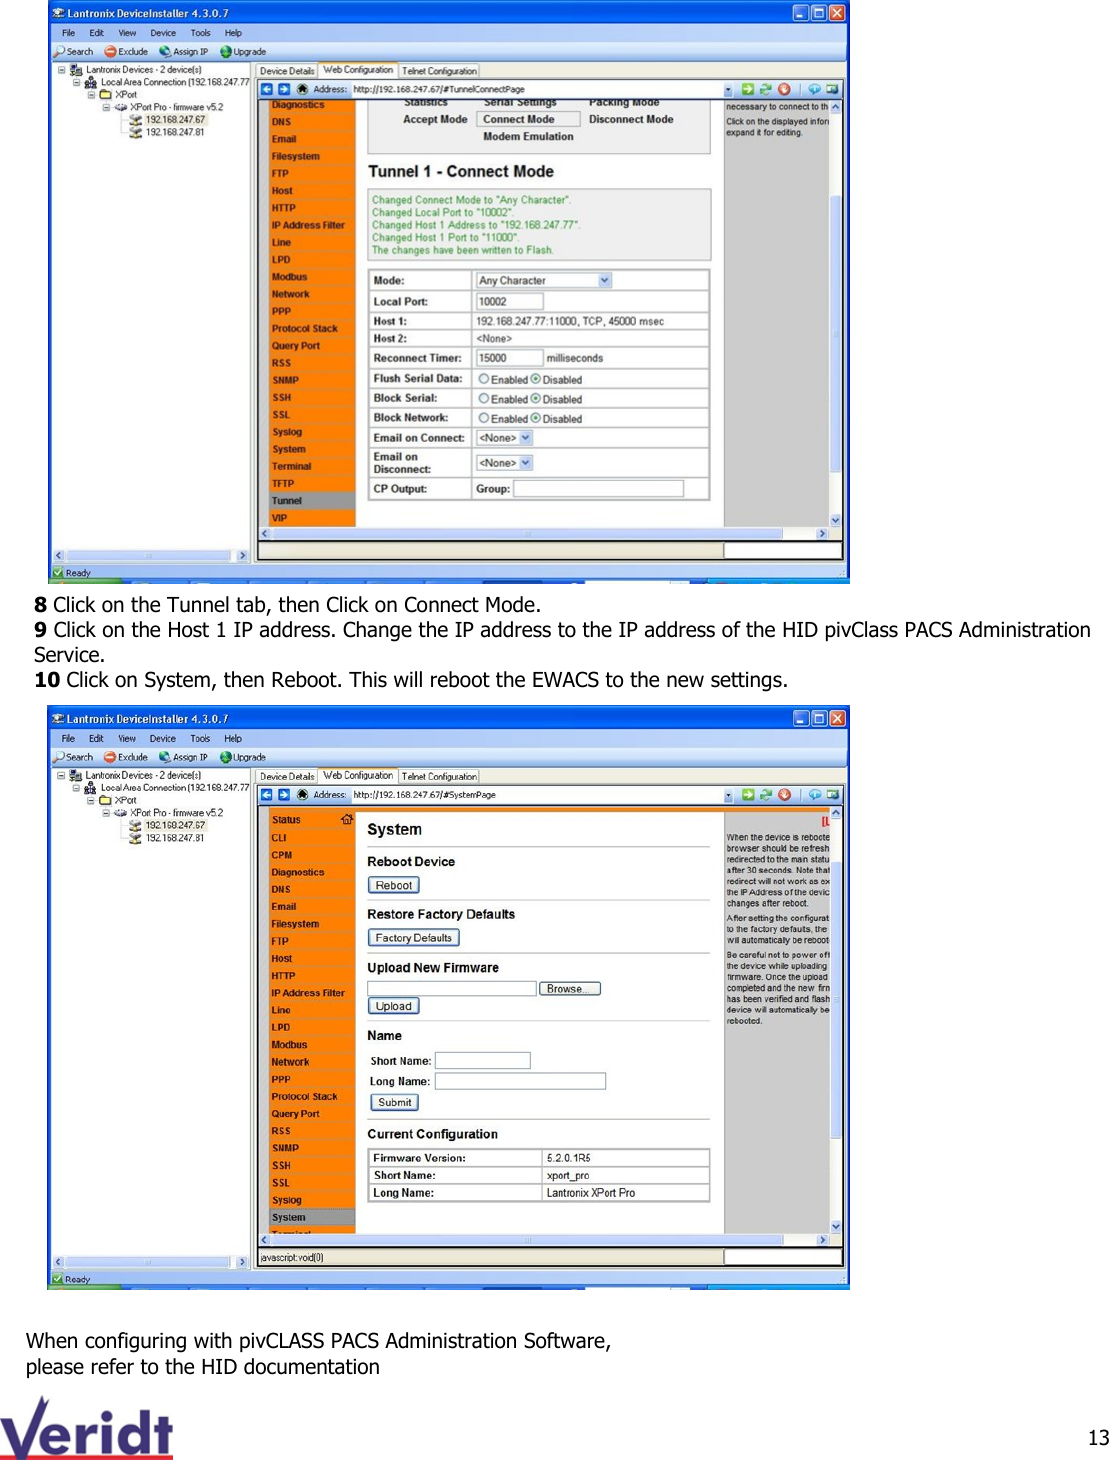  13  When configuring with pivCLASS PACS Administration Software, please refer to the HID documentation 8 Click on the Tunnel tab, then Click on Connect Mode. 9 Click on the Host 1 IP address. Change the IP address to the IP address of the HID pivClass PACS Administration Service. 10 Click on System, then Reboot. This will reboot the EWACS to the new settings. 